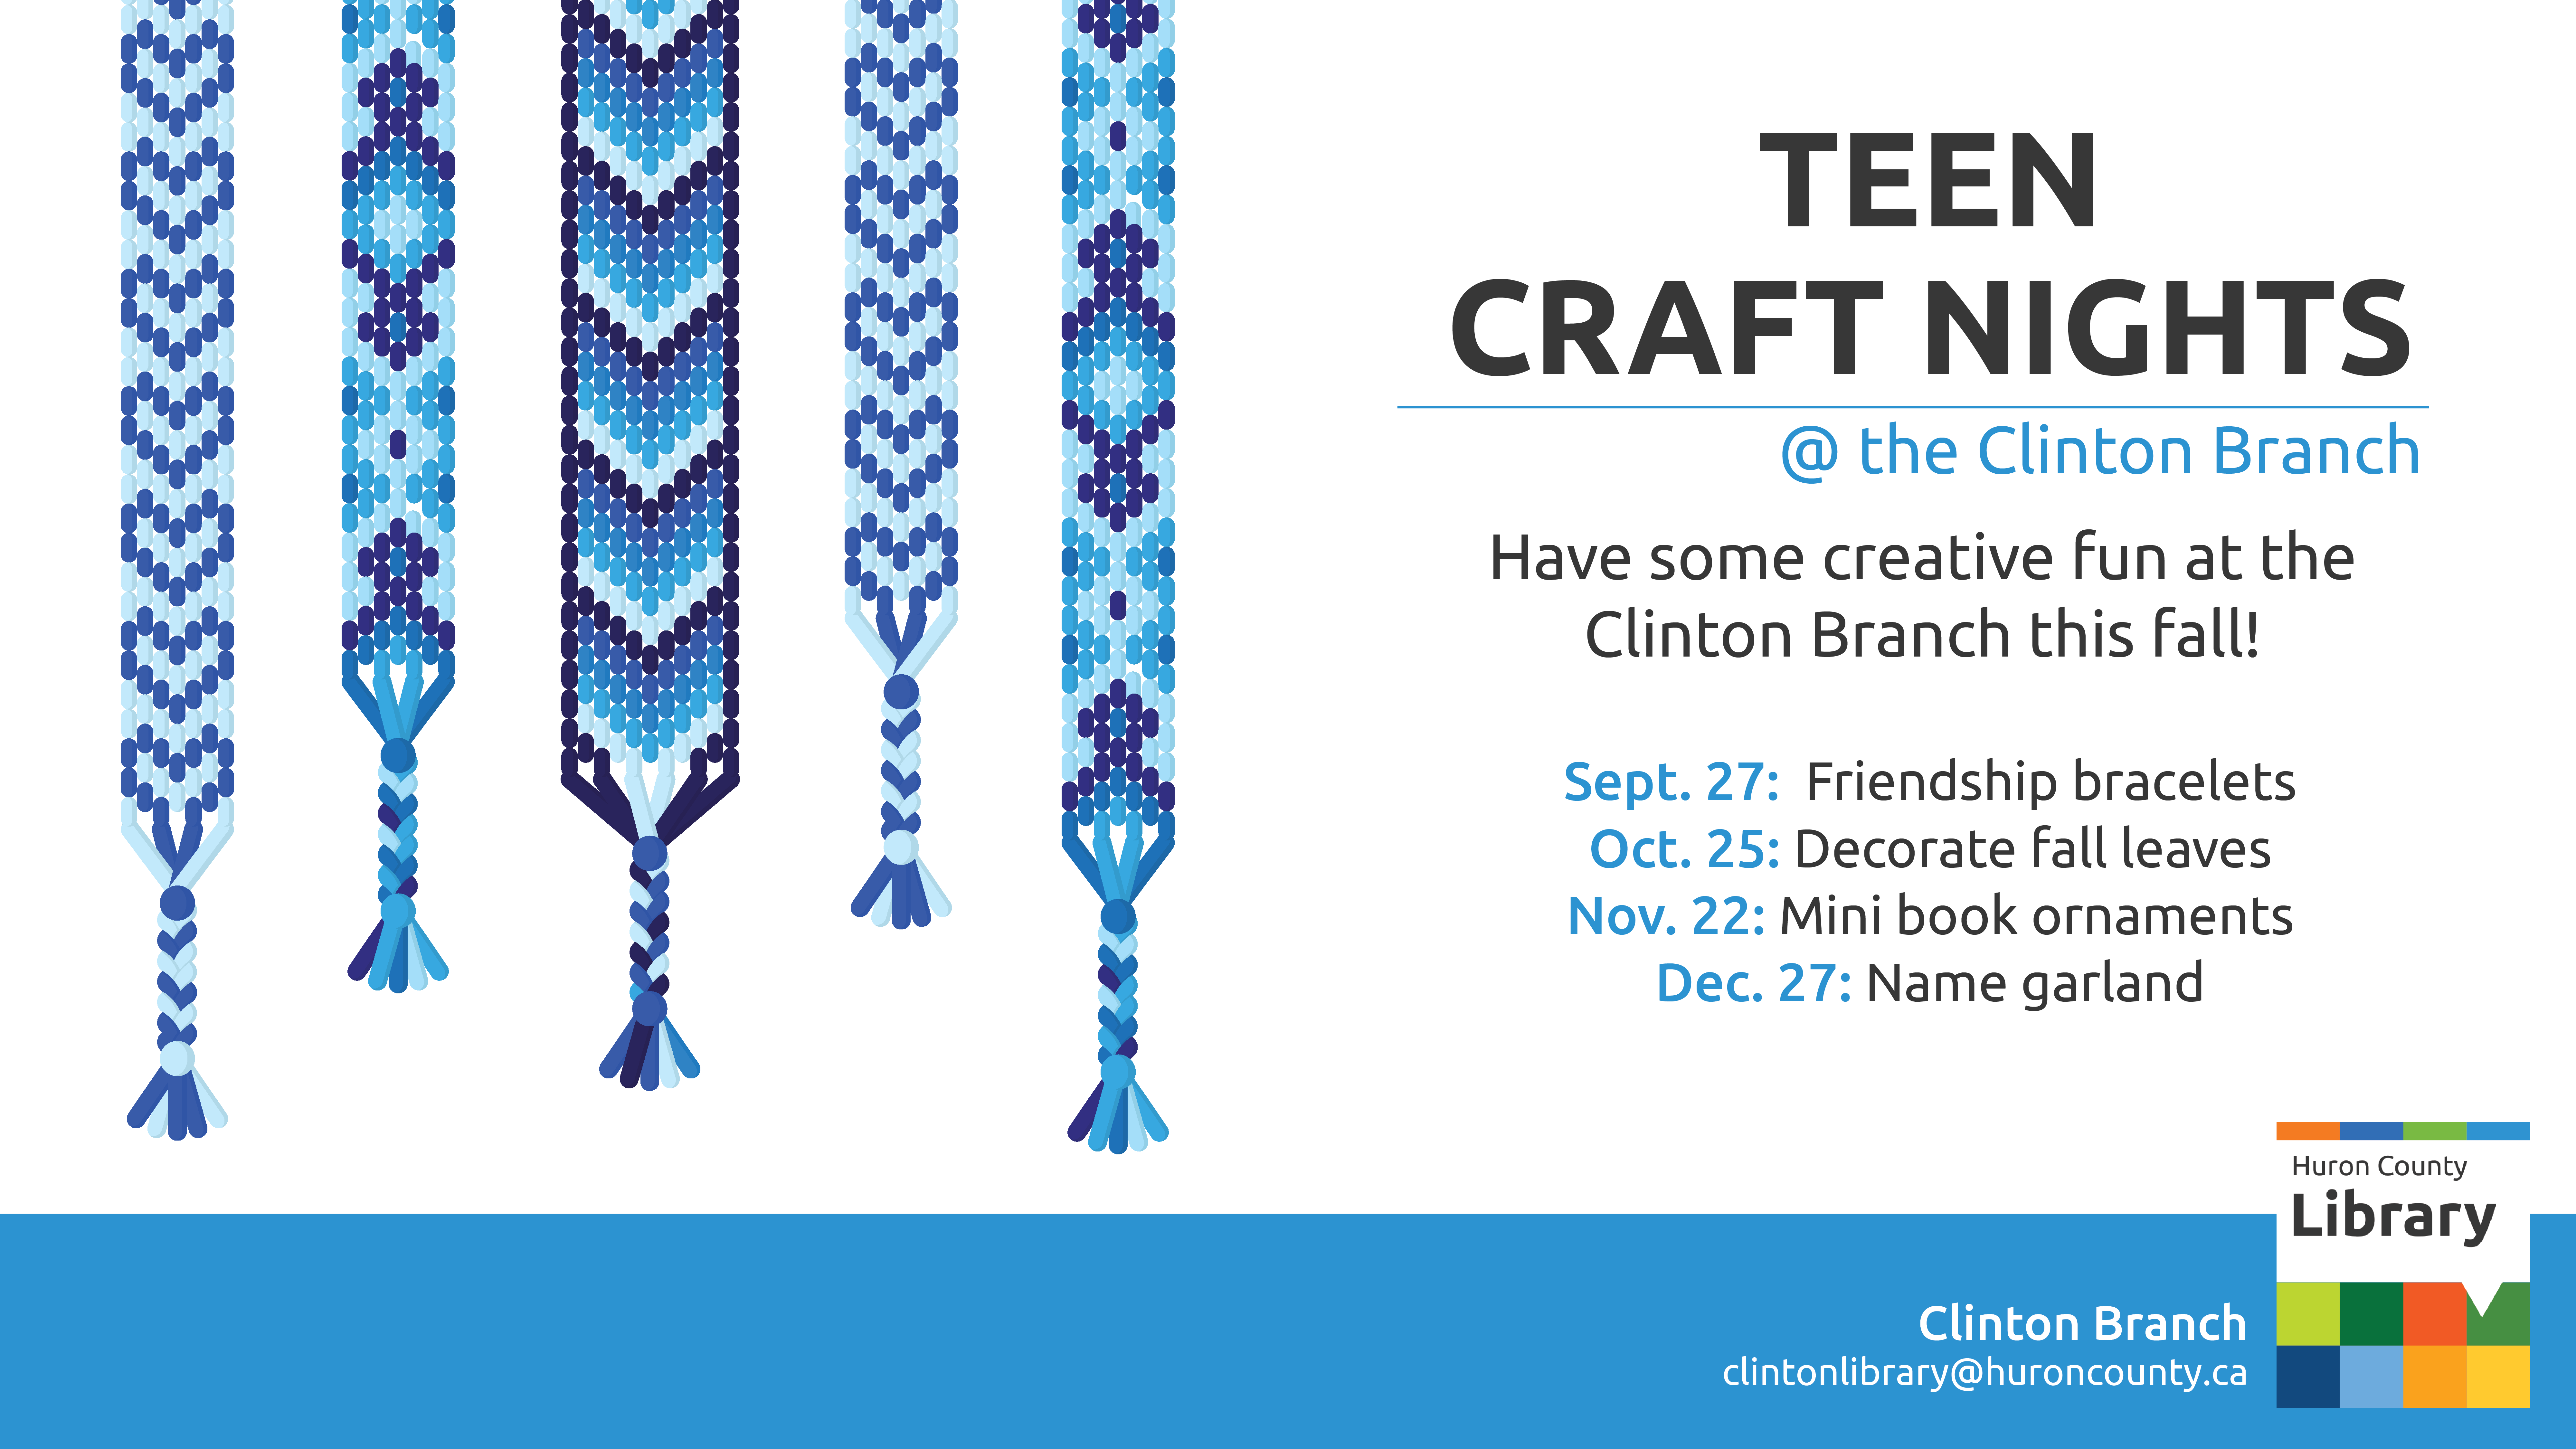 Illustration of friendship bracelets with text promoting teen craft nights at Clinton Branch